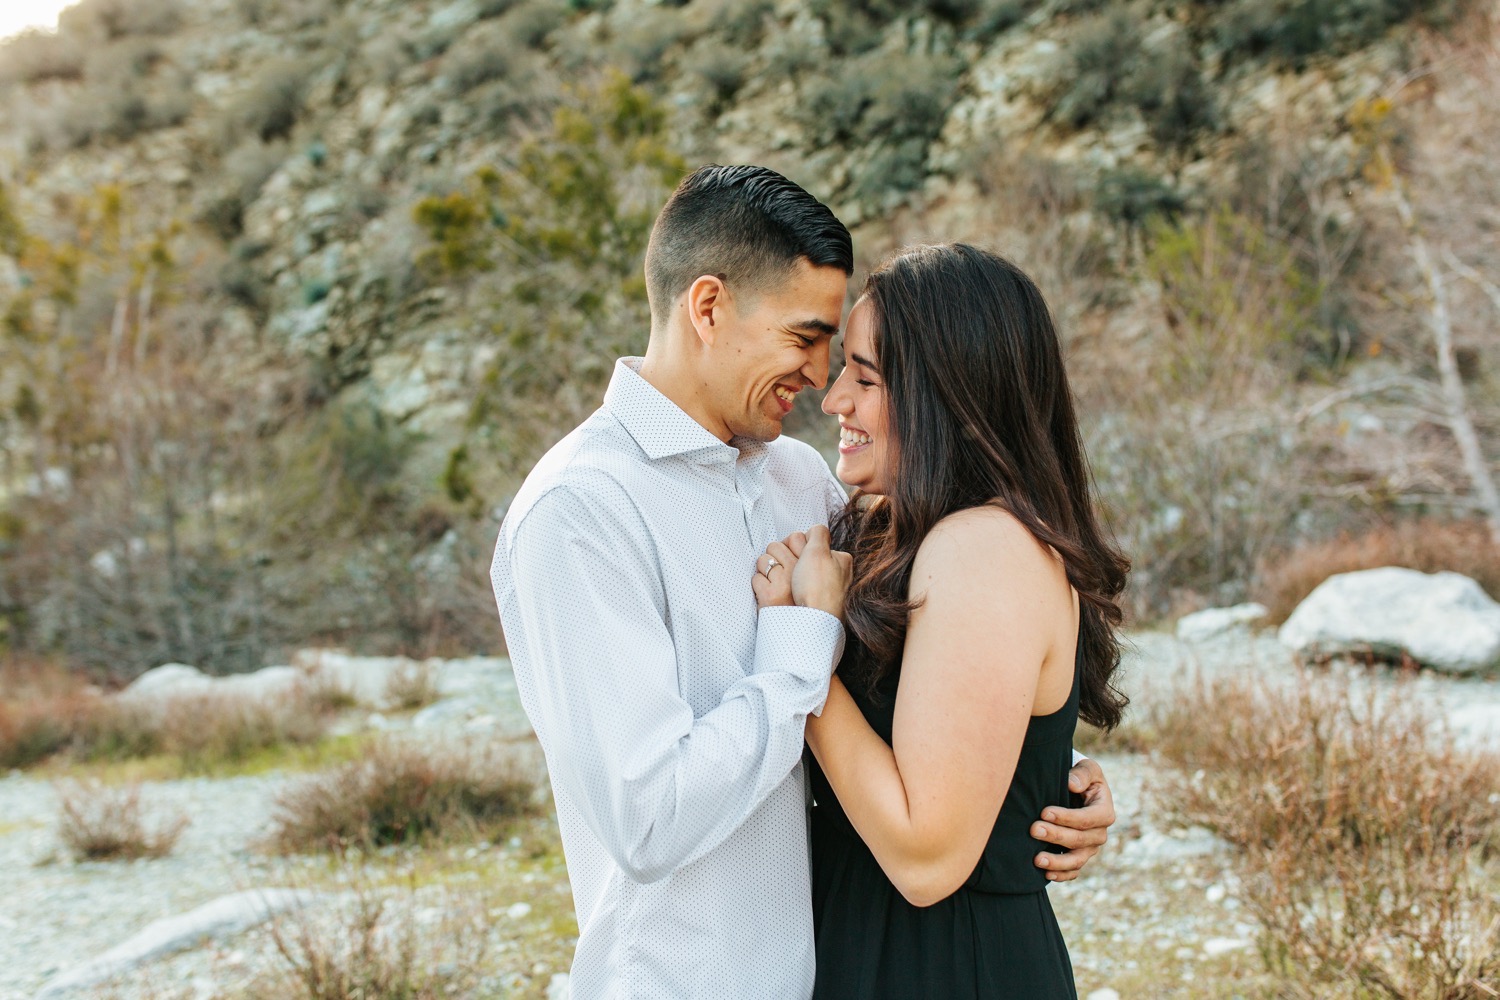 Romantic and Sweet Engagement Photography - https://brittneyhannonphotography.com